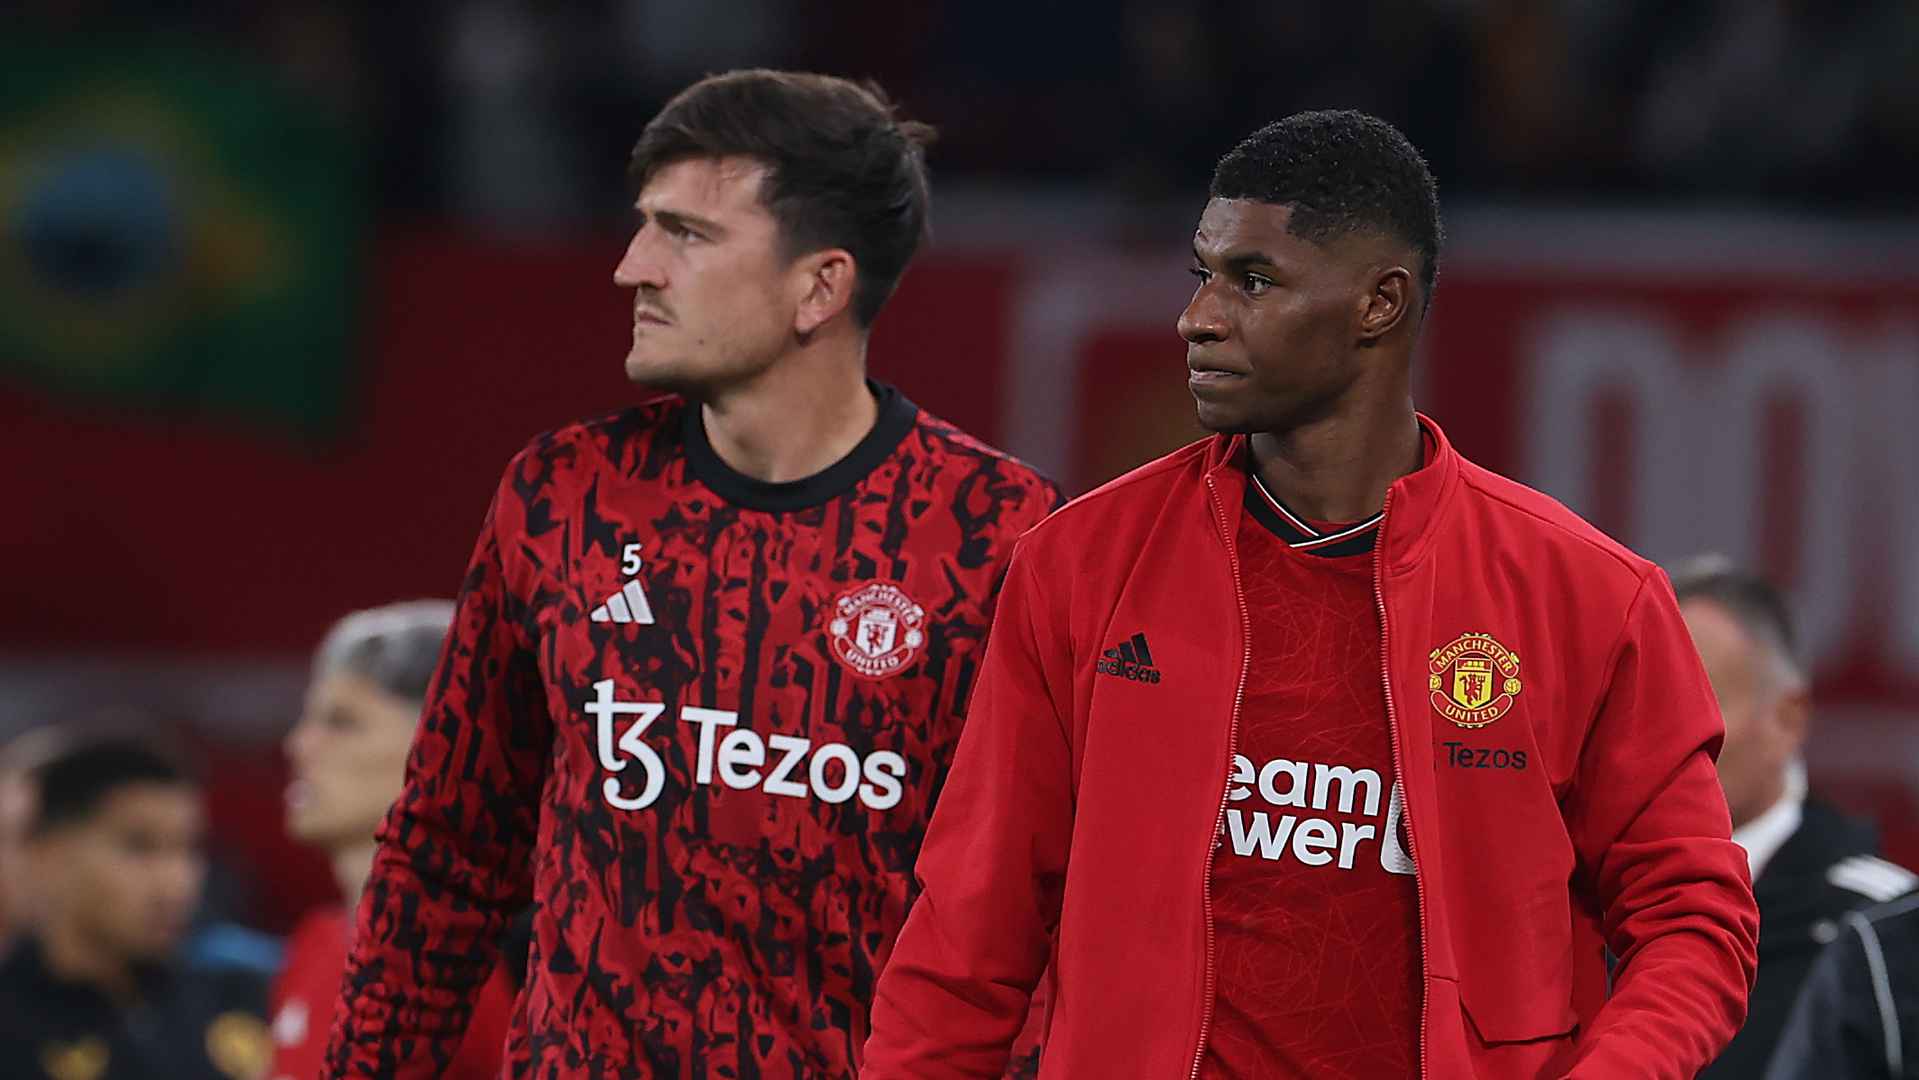 England international squad announced with Man Utd Harry Maguire and Marcus Rashford in it